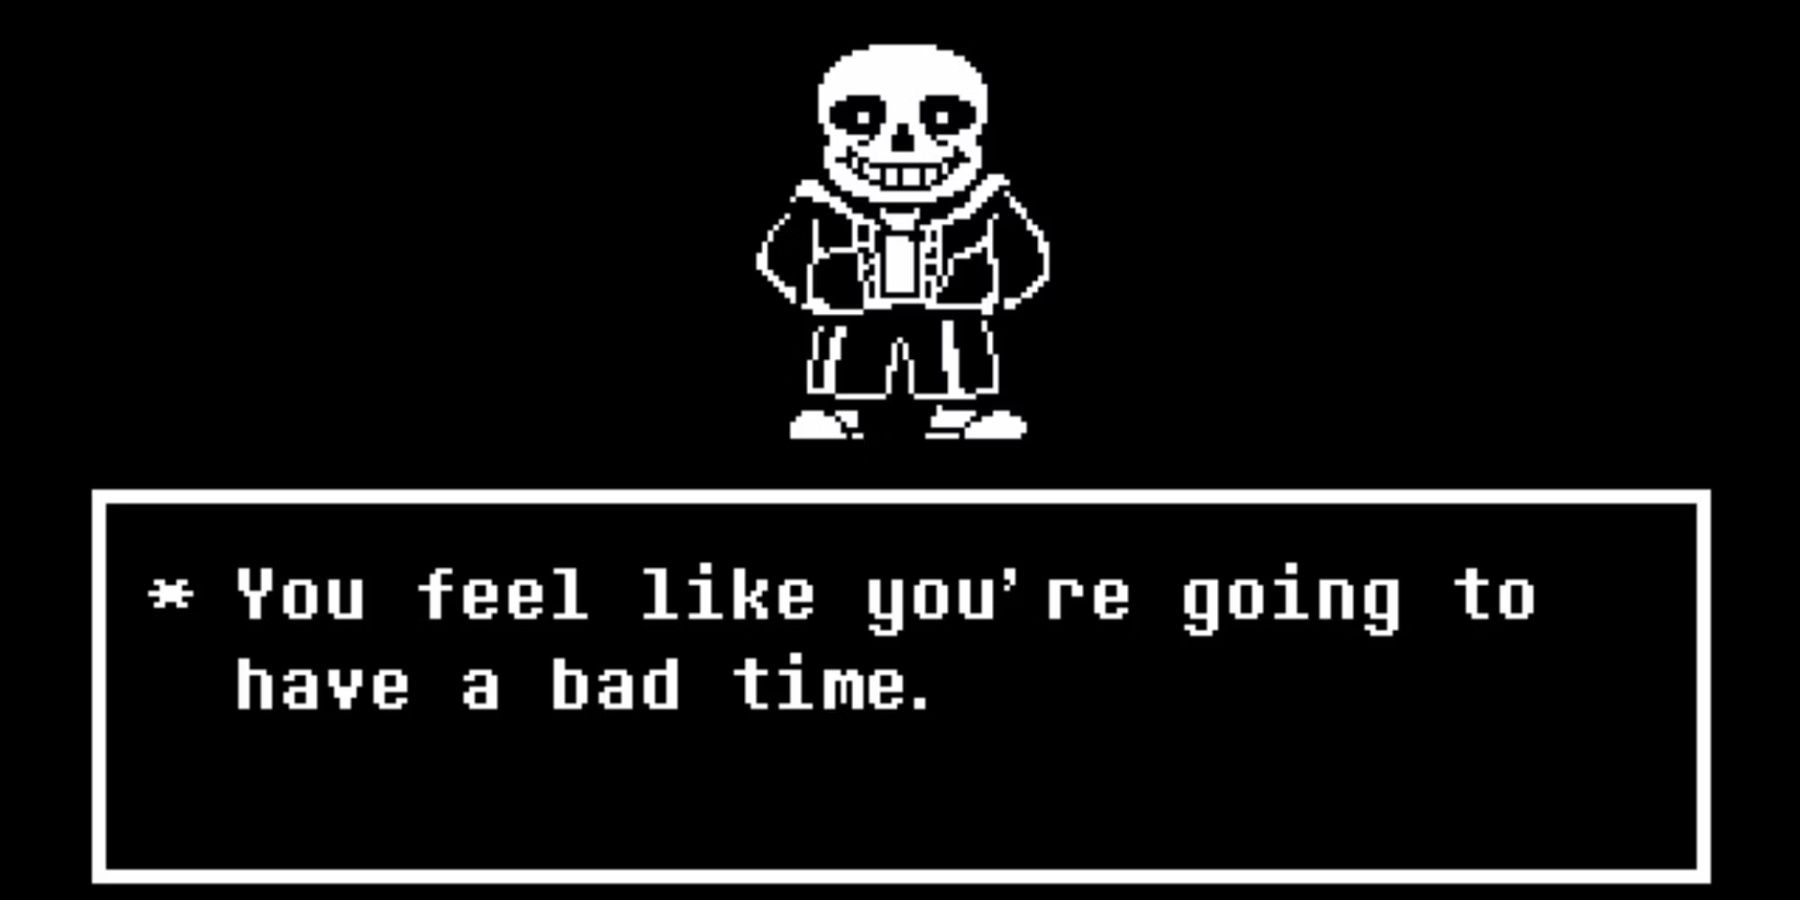 Sans from Undertale, a skeleton wearing a hoodie, standing above text reading 'You feel like you're going to have a bad time.'